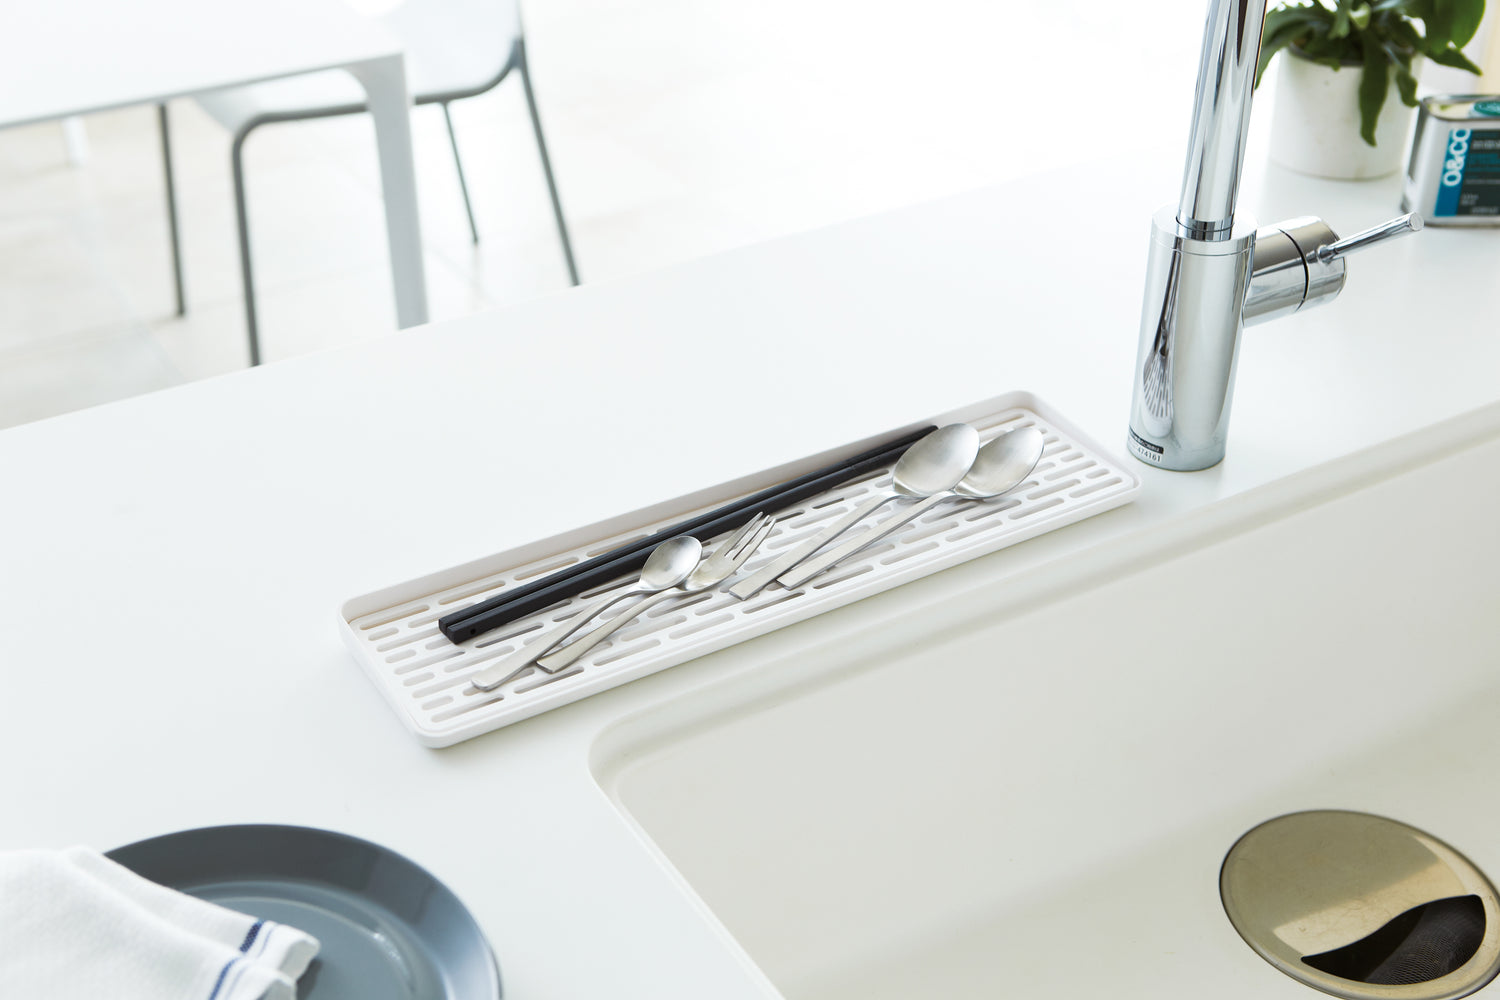 View 4 - White Sink Drainer Tray holding silverware on sink countertop by Yamazaki Home.